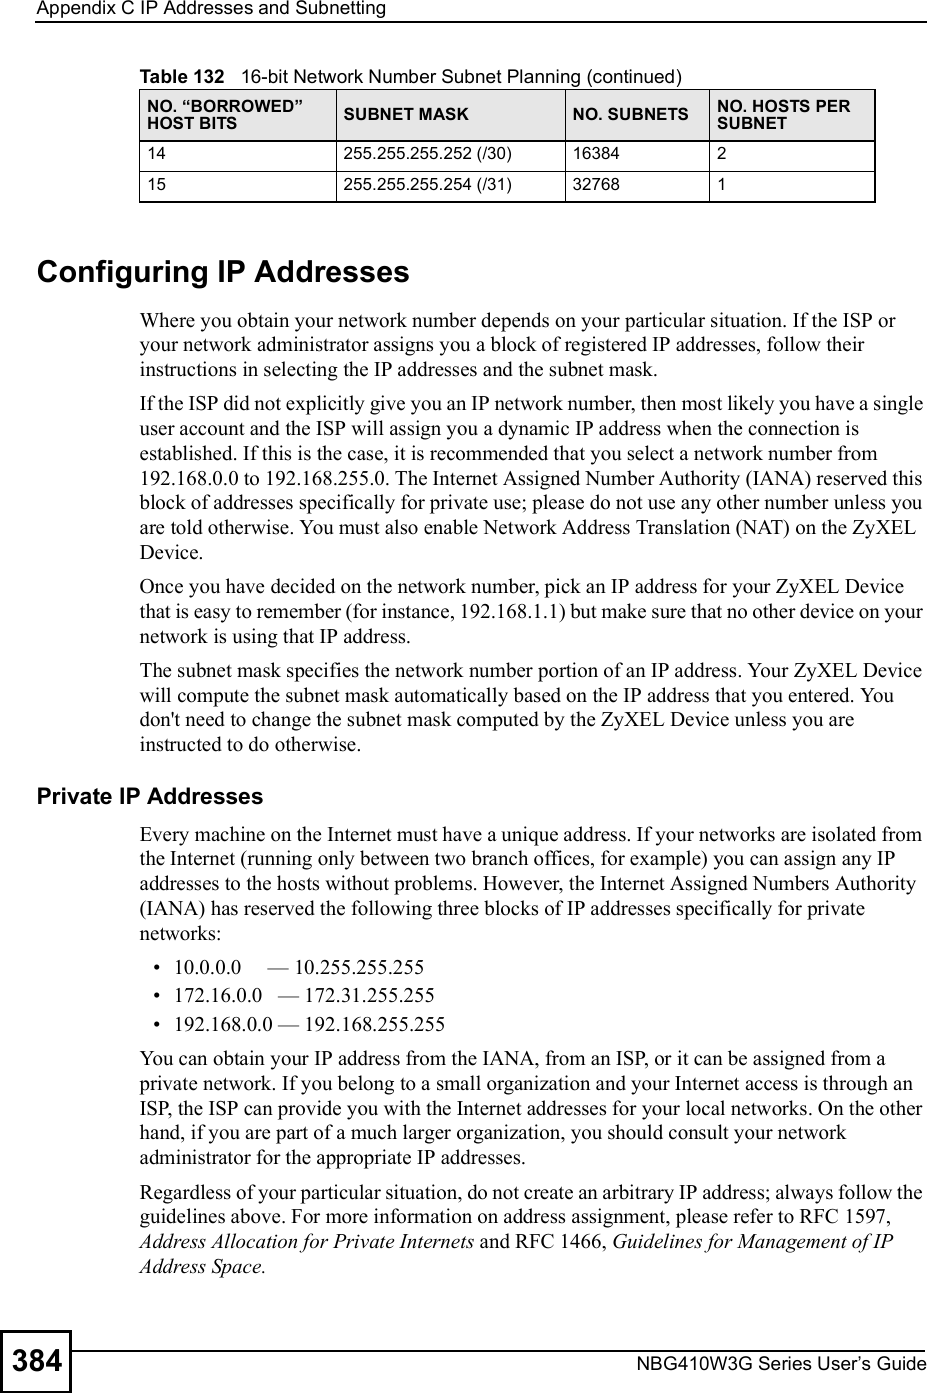 Appendix CIP Addresses and SubnettingNBG410W3G Series User s Guide384Configuring IP AddressesWhere you obtain your network number depends on your particular situation. If the ISP or your network administrator assigns you a block of registered IP addresses, follow their instructions in selecting the IP addresses and the subnet mask.If the ISP did not explicitly give you an IP network number, then most likely you have a single user account and the ISP will assign you a dynamic IP address when the connection is established. If this is the case, it is recommended that you select a network number from 192.168.0.0 to 192.168.255.0. The Internet Assigned Number Authority (IANA) reserved this block of addresses specifically for private use; please do not use any other number unless you are told otherwise. You must also enable Network Address Translation (NAT) on the ZyXEL Device.  Once you have decided on the network number, pick an IP address for your ZyXEL Device that is easy to remember (for instance, 192.168.1.1) but make sure that no other device on your network is using that IP address.The subnet mask specifies the network number portion of an IP address. Your ZyXEL Device will compute the subnet mask automatically based on the IP address that you entered. You don&apos;t need to change the subnet mask computed by the ZyXEL Device unless you are instructed to do otherwise.Private IP AddressesEvery machine on the Internet must have a unique address. If your networks are isolated from the Internet (running only between two branch offices, for example) you can assign any IP addresses to the hosts without problems. However, the Internet Assigned Numbers Authority (IANA) has reserved the following three blocks of IP addresses specifically for private networks: 10.0.0.0     $ 10.255.255.255 172.16.0.0   $ 172.31.255.255 192.168.0.0 $ 192.168.255.255You can obtain your IP address from the IANA, from an ISP, or it can be assigned from a private network. If you belong to a small organization and your Internet access is through an ISP, the ISP can provide you with the Internet addresses for your local networks. On the other hand, if you are part of a much larger organization, you should consult your network administrator for the appropriate IP addresses.Regardless of your particular situation, do not create an arbitrary IP address; always follow the guidelines above. For more information on address assignment, please refer to RFC 1597, Address Allocation for Private Internets and RFC 1466, Guidelines for Management of IP Address Space.14 255.255.255.252 (/30) 16384 215 255.255.255.254 (/31) 32768 1Table 132   16-bit Network Number Subnet Planning (continued)NO. &quot;BORROWED# HOST BITS SUBNET MASK NO. SUBNETS NO. HOSTS PER SUBNET